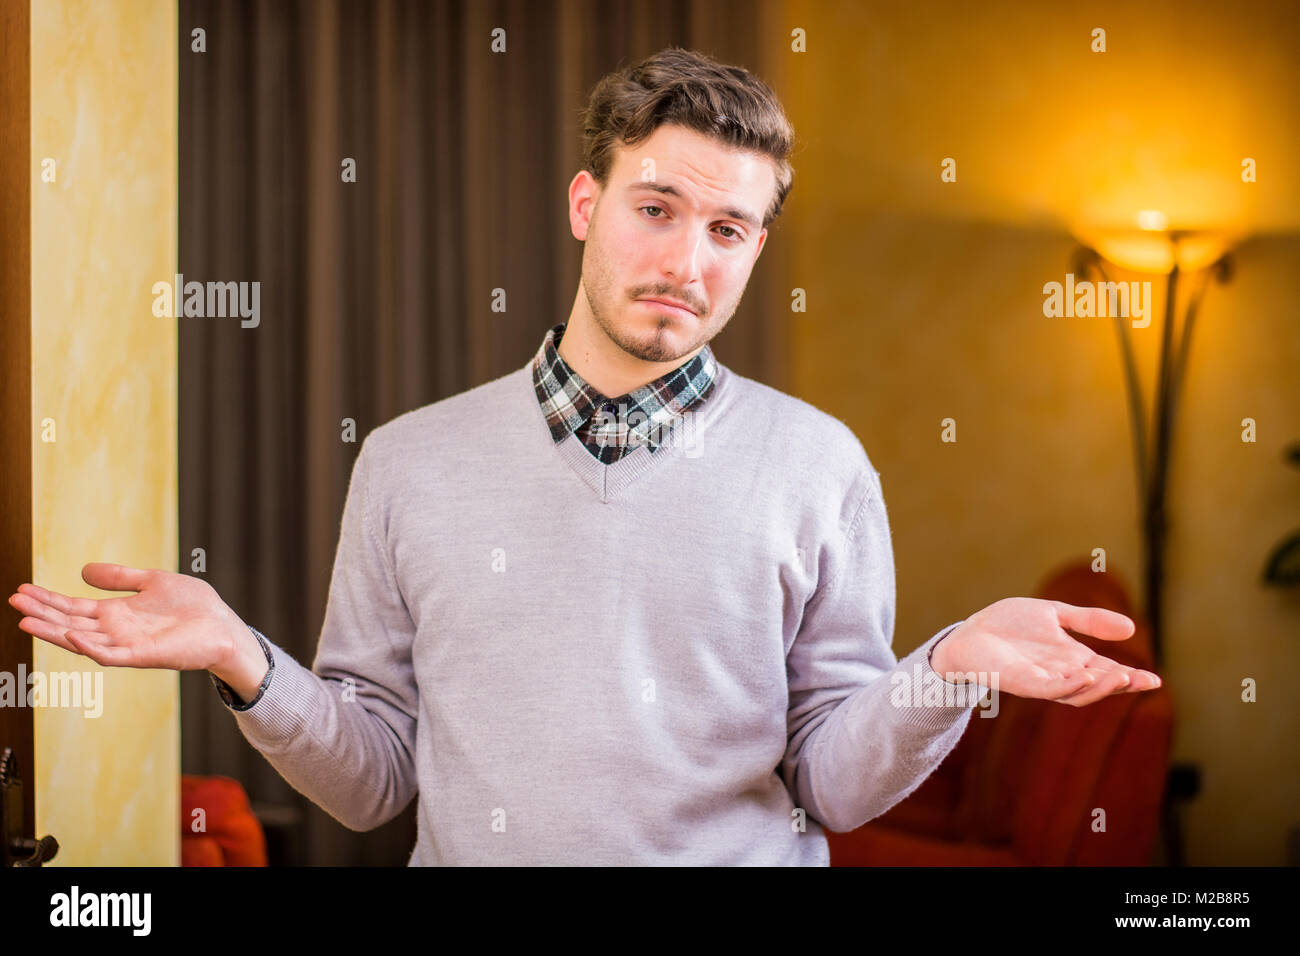 Confused or doubtful young man shrugging with palms open Stock Photo